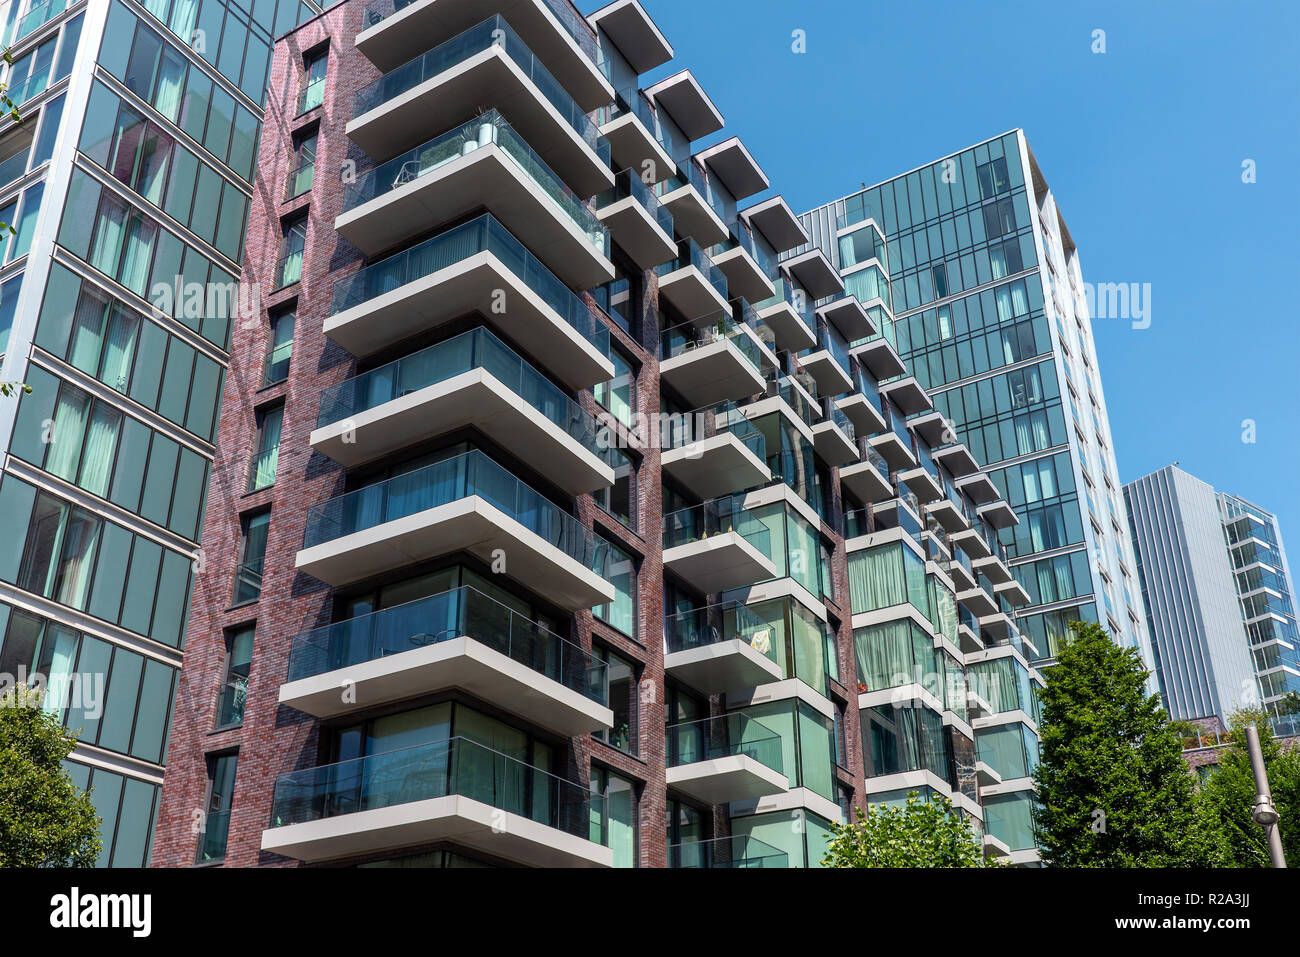 Modern high-rise residential building seen in London Stock Photo